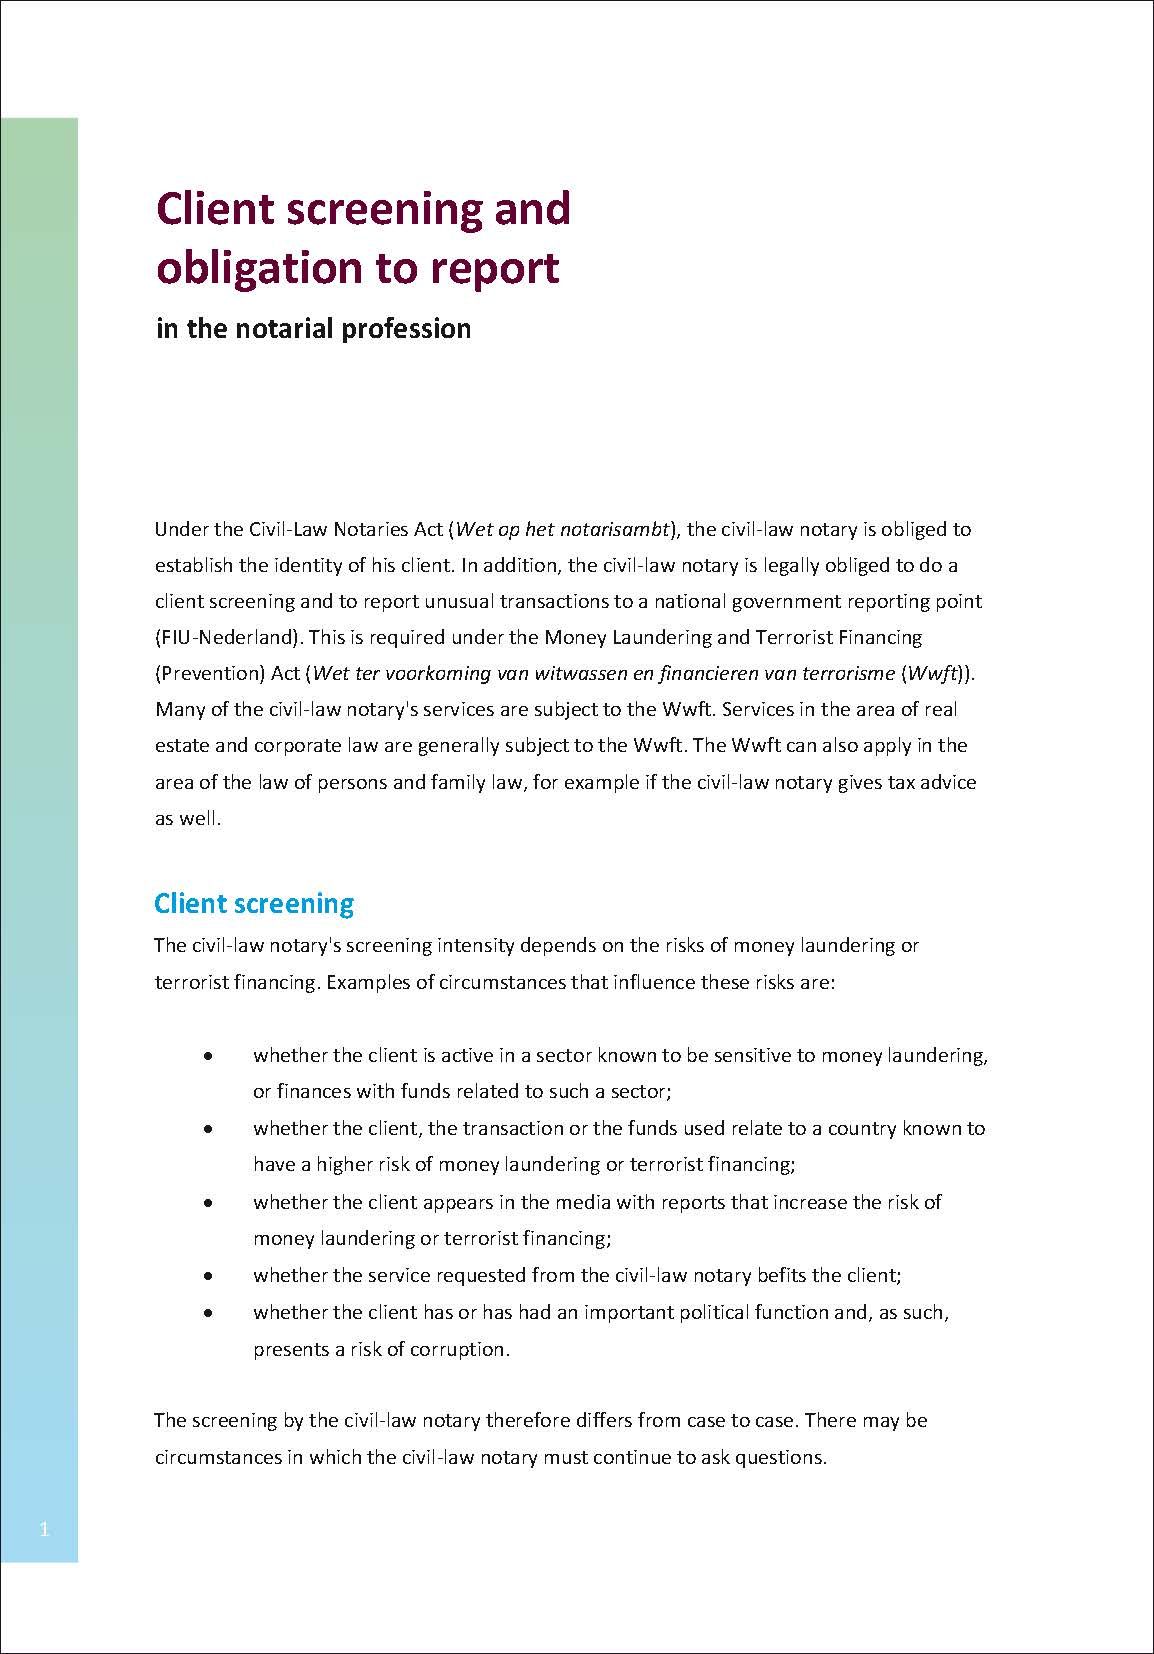 Brochure client screening and obligation to report